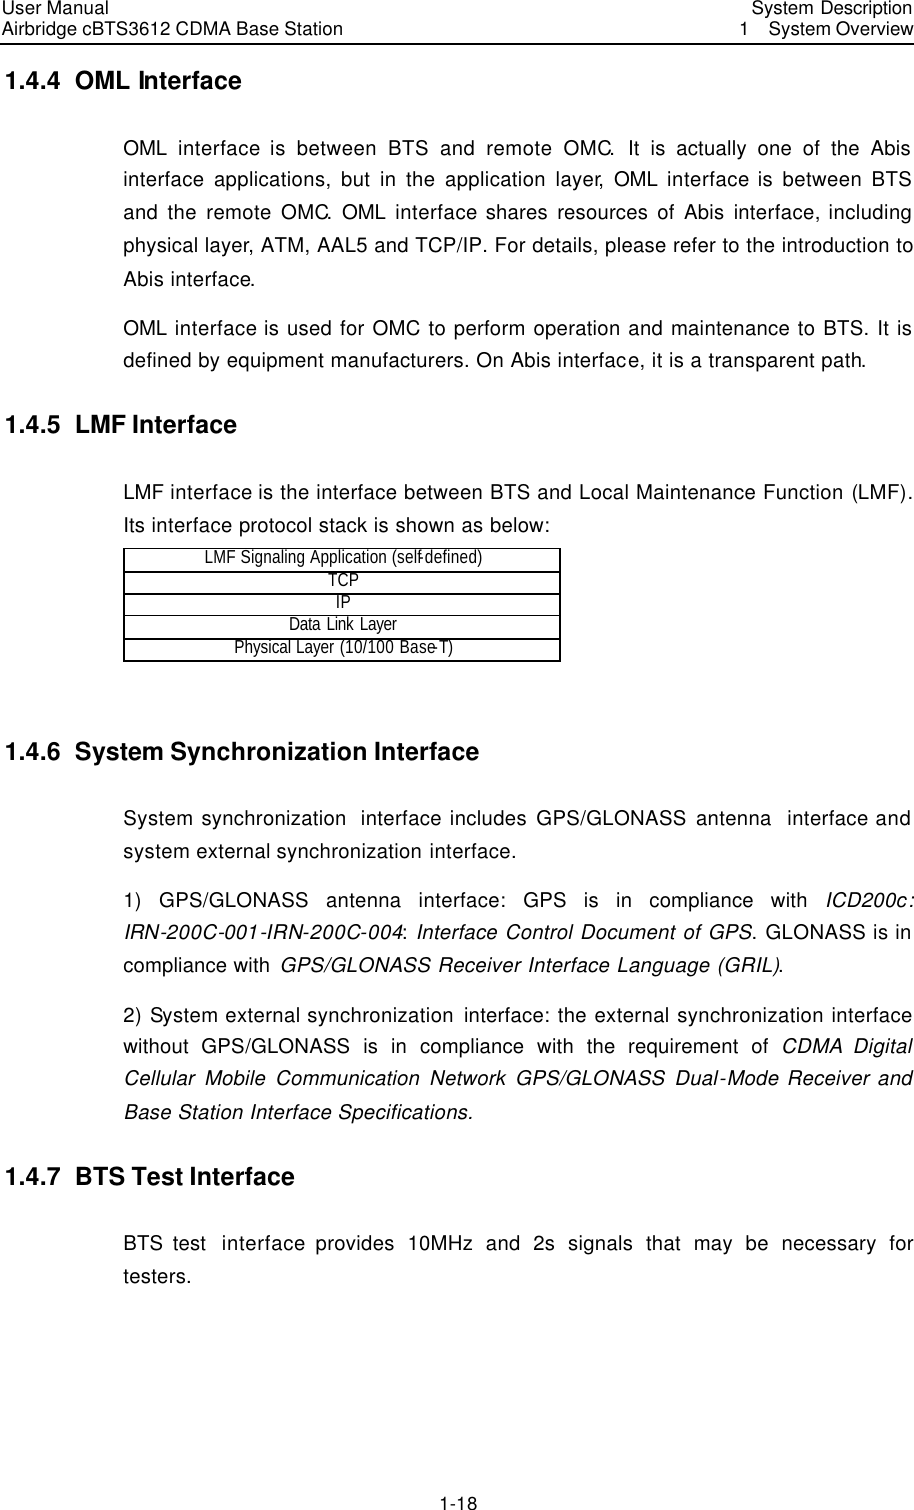 User Manual Airbridge cBTS3612 CDMA Base Station   System Description1  System Overview 1-18 1.4.4  OML Interface OML  interface is between BTS and remote OMC.  It is actually one of the Abis interface applications, but in the application layer, OML  interface is between BTS and the remote OMC. OML  interface shares resources of Abis interface, including physical layer, ATM, AAL5 and TCP/IP. For details, please refer to the introduction to Abis interface.   OML interface is used for OMC to perform operation and maintenance to BTS. It is defined by equipment manufacturers. On Abis interface, it is a transparent path.   1.4.5  LMF Interface LMF interface is the interface between BTS and Local Maintenance Function (LMF). Its interface protocol stack is shown as below:   LMF Signaling Application (self-defined) TCP IP Data Link Layer Physical Layer (10/100 Base-T)  1.4.6  System Synchronization Interface System synchronization  interface includes GPS/GLONASS antenna  interface and system external synchronization interface.   1) GPS/GLONASS antenna interface:  GPS is in compliance with ICD200c: IRN-200C-001-IRN-200C-004: Interface Control Document of GPS. GLONASS is in compliance with GPS/GLONASS Receiver Interface Language (GRIL).   2) System external synchronization  interface: the external synchronization interface without GPS/GLONASS is in compliance with the requirement of CDMA Digital Cellular Mobile Communication Network GPS/GLONASS Dual-Mode Receiver and Base Station Interface Specifications.   1.4.7  BTS Test Interface BTS test  interface provides 10MHz and 2s signals that may be necessary for testers.   